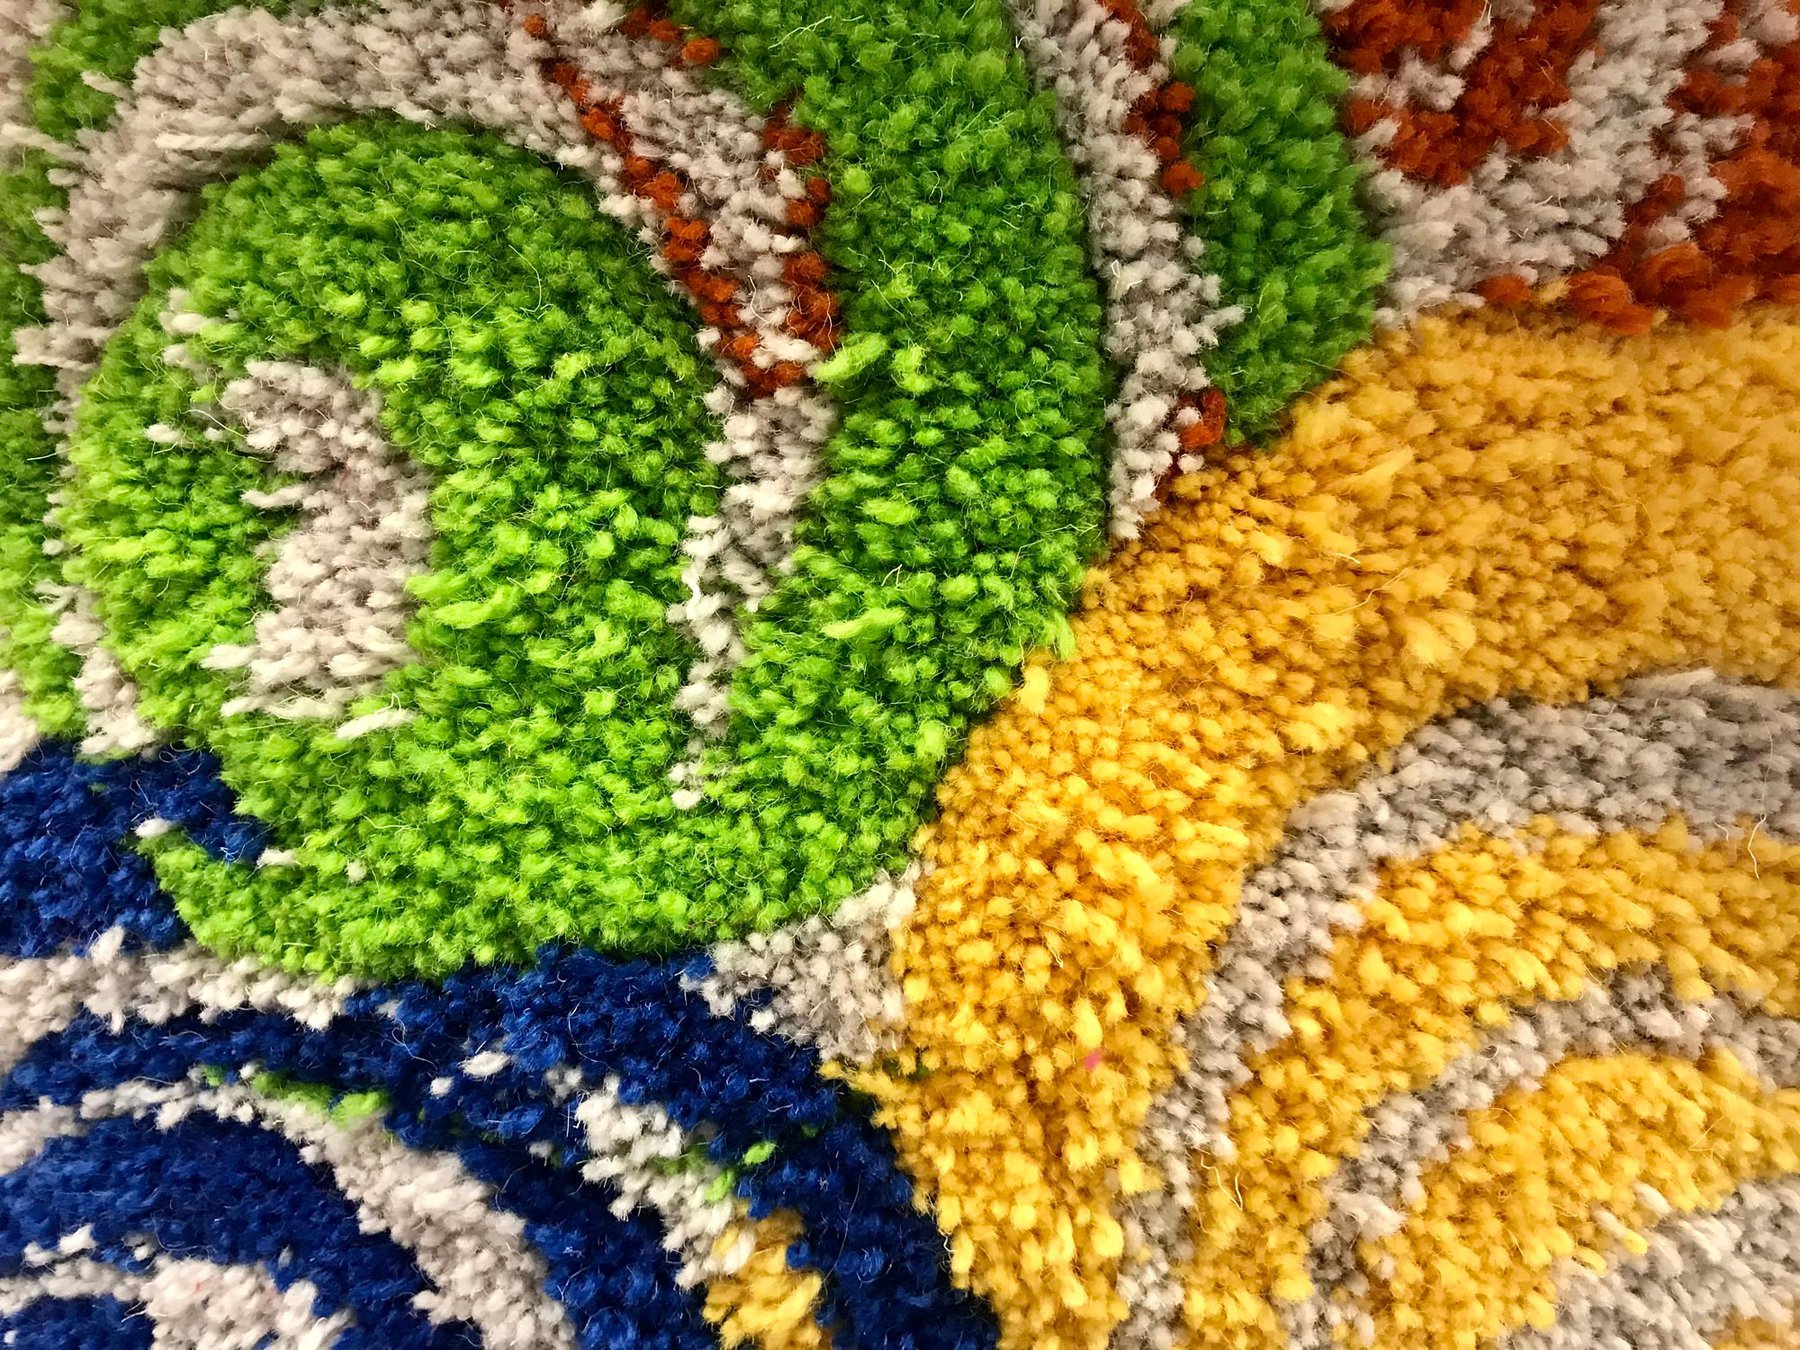 Detail of tufted rug in greens and yellows by Syeda Rahman